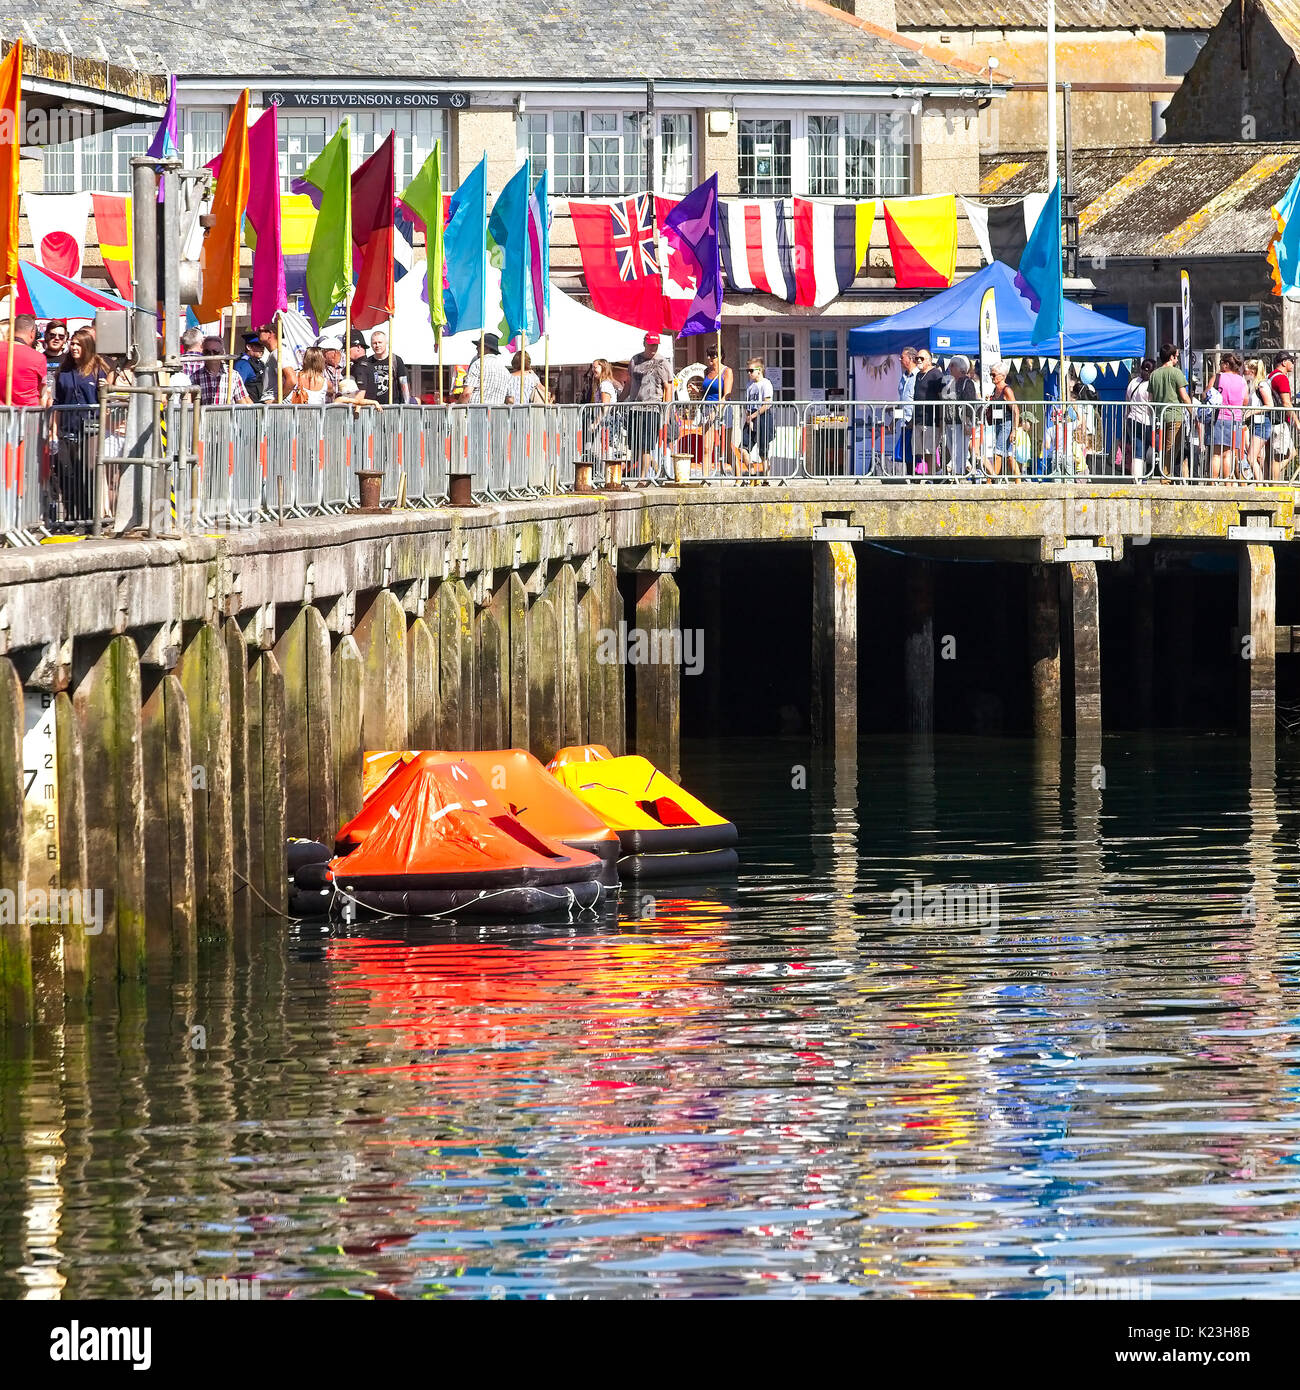 Newlyn, Cornwall, UK. 28th Aug, 2017. Flags, liferafts and crowds at the Newlyn Fish Festival, Newlyn, Cornwall, England, UK. Credit: tony mills/Alamy Live News Stock Photo